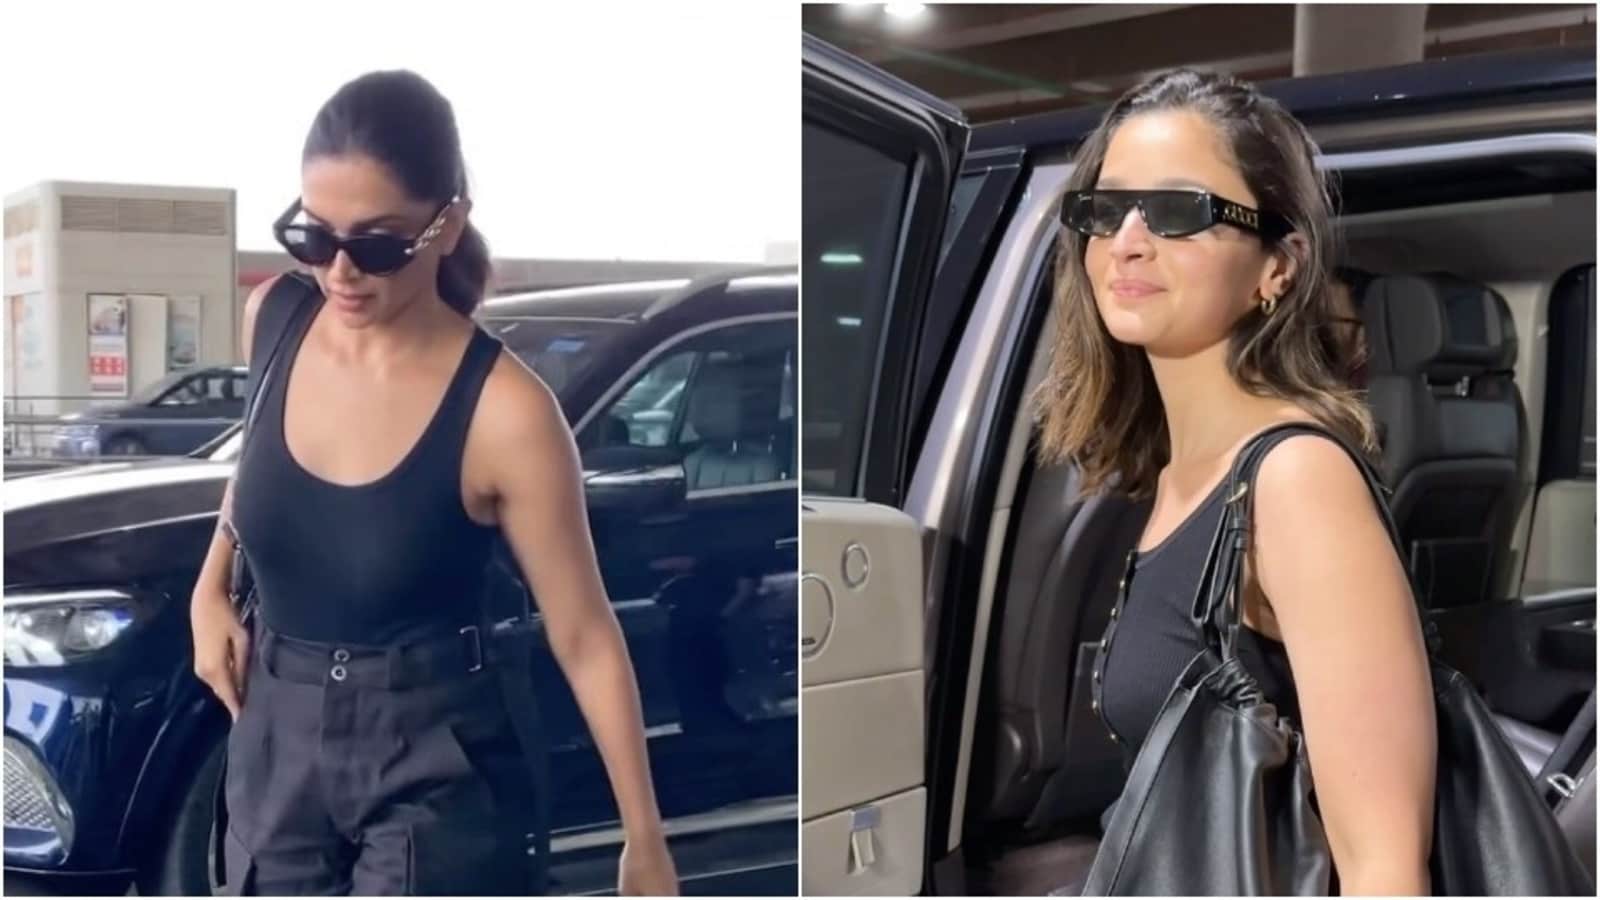 Deepika Padukone’s all-black boss babe look and Alia Bhatt’s minimal airport styling wows the internet. Take notes